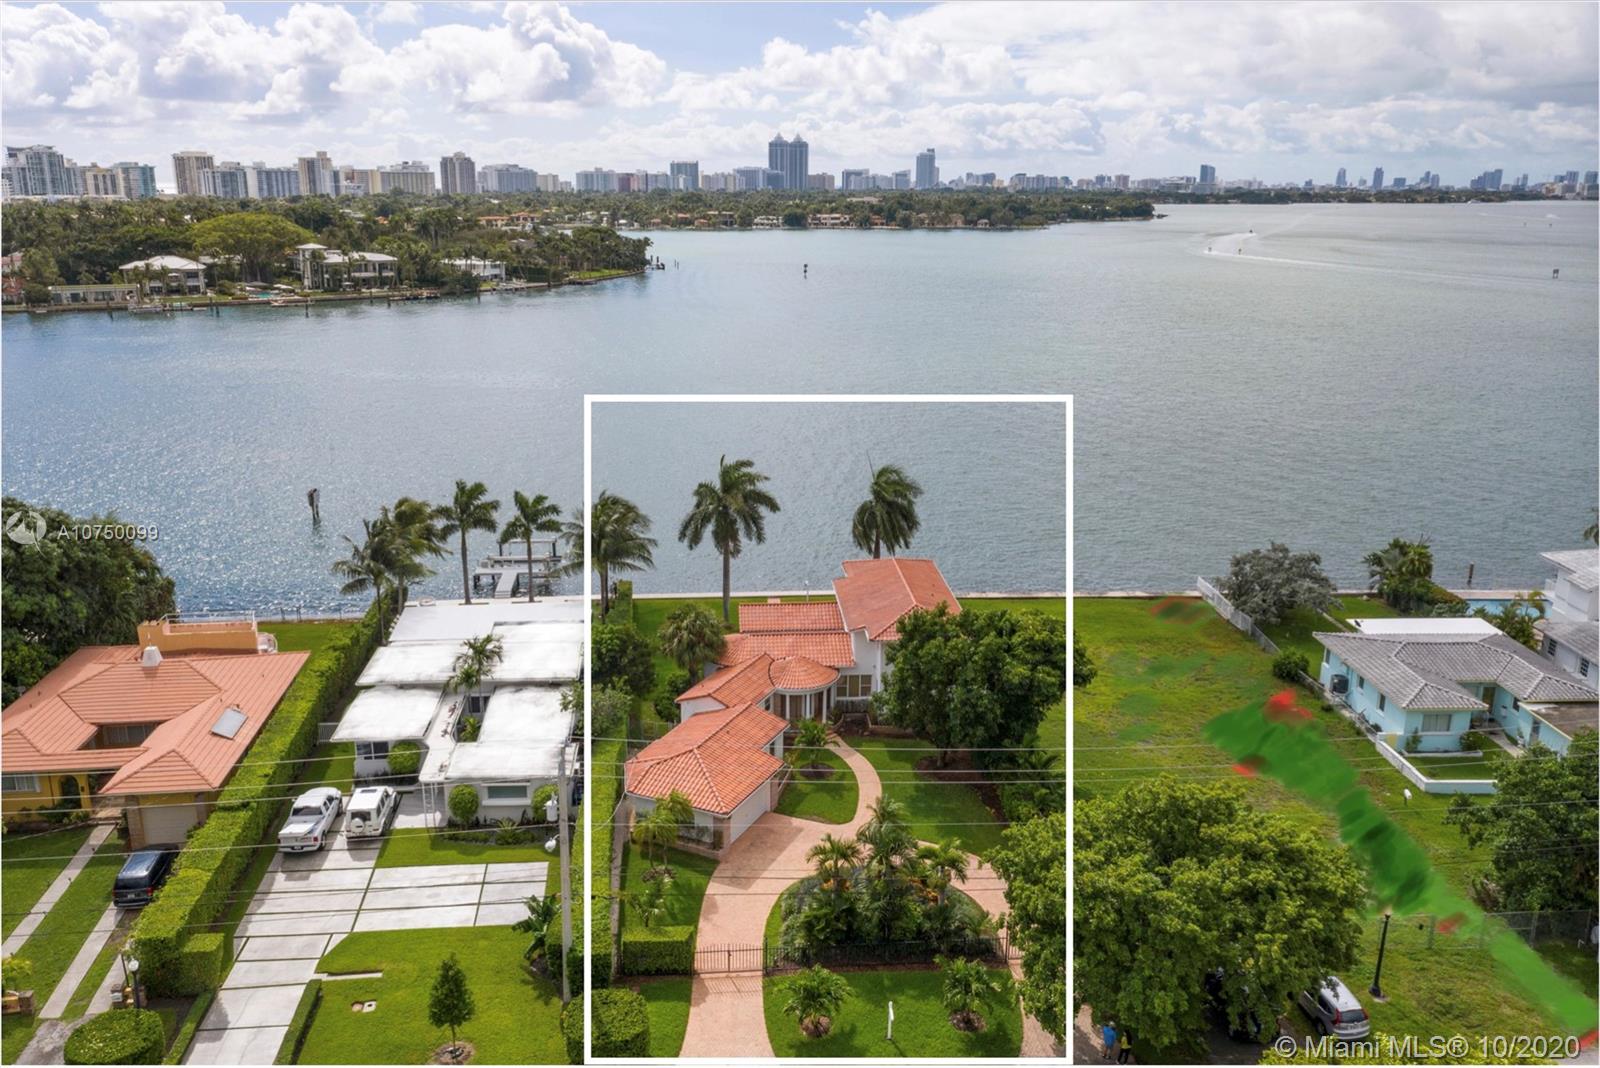 Huge 13,000 square foot lot. 77 feet on the water